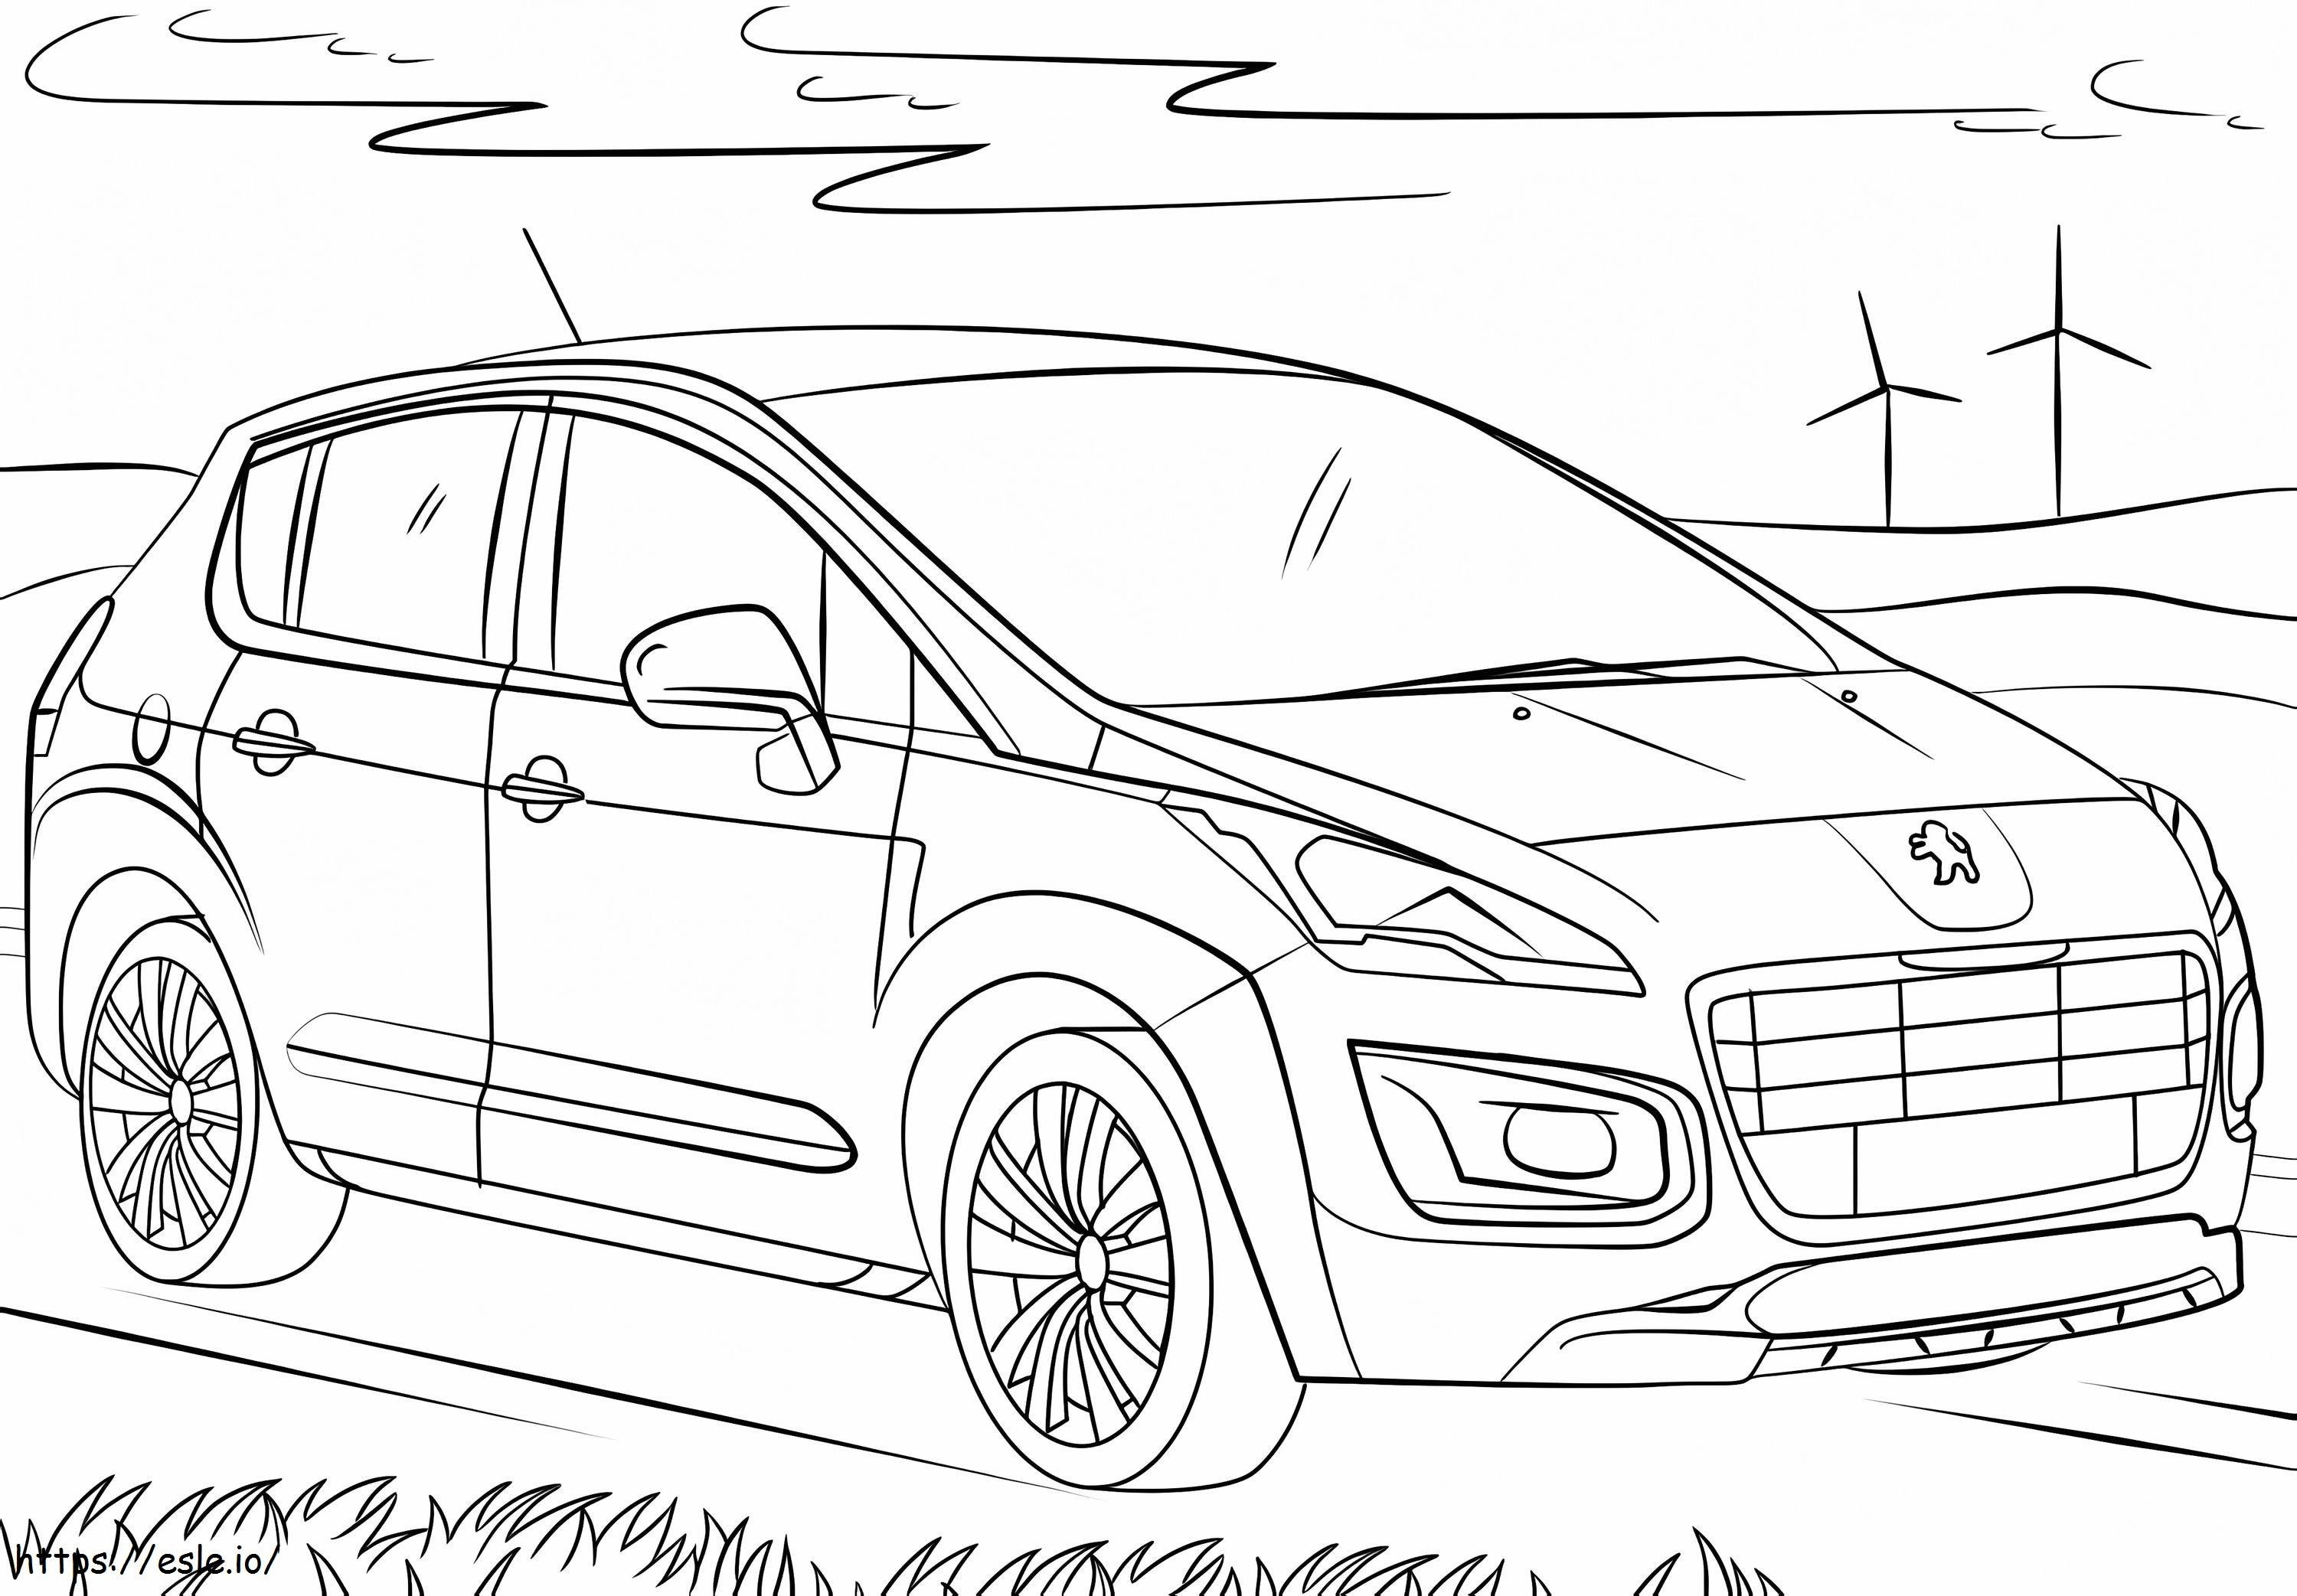 Peugeot 3008 coloring page